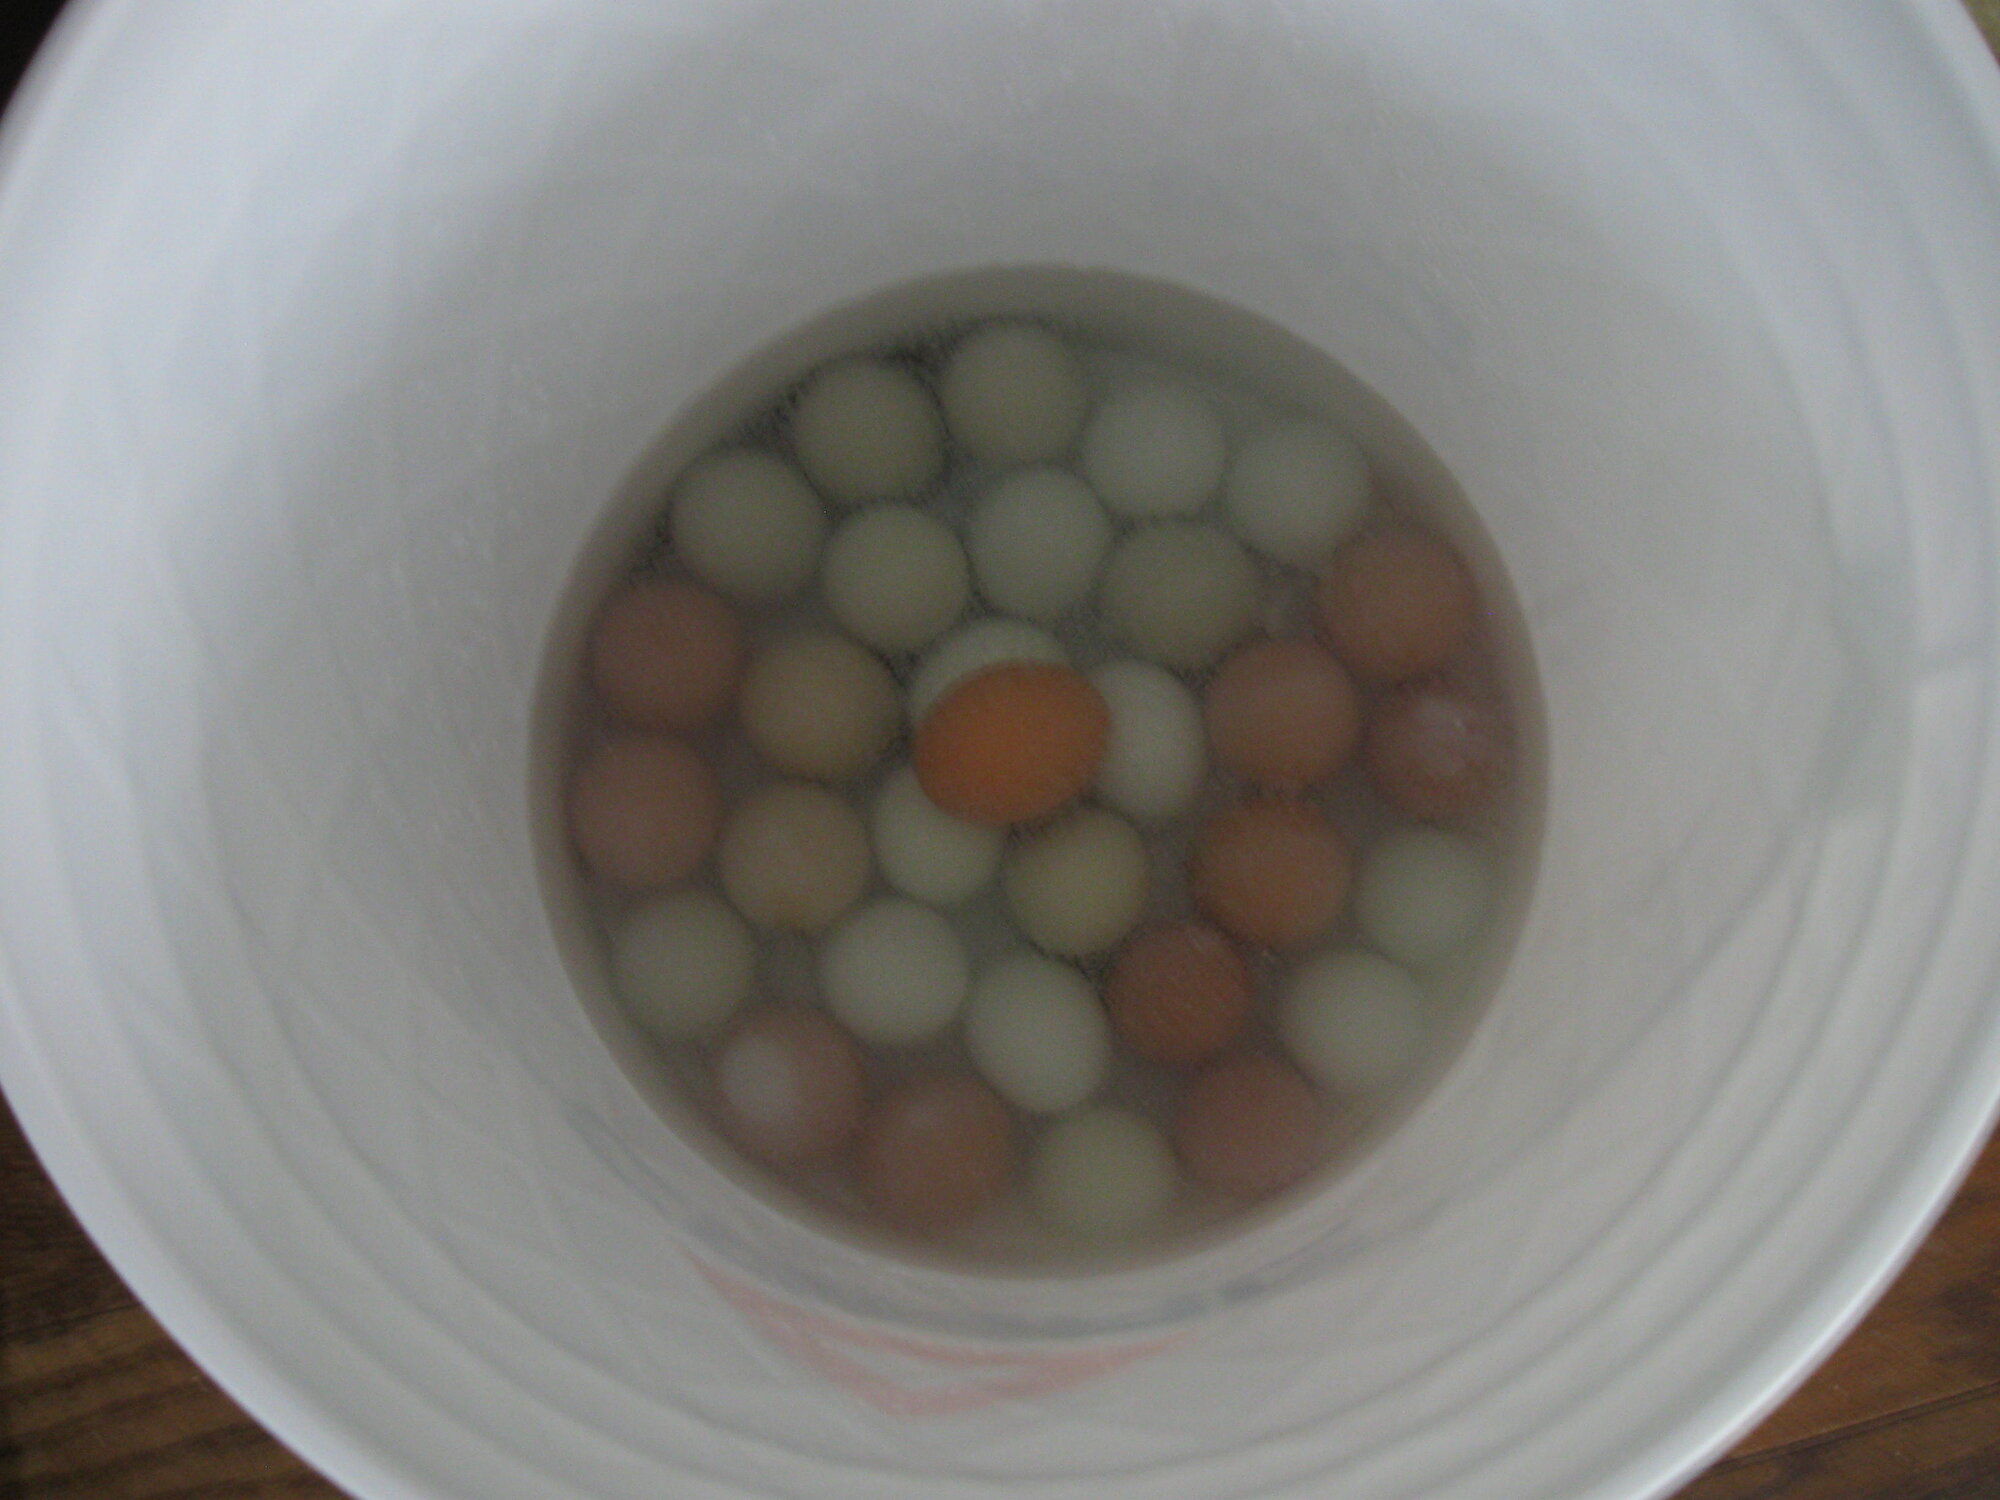 https://www.backyardchickens.com/articles/preserving-eggs-with-water-glassing-the-results-of-my-year-long-experiment.76845/cover-image